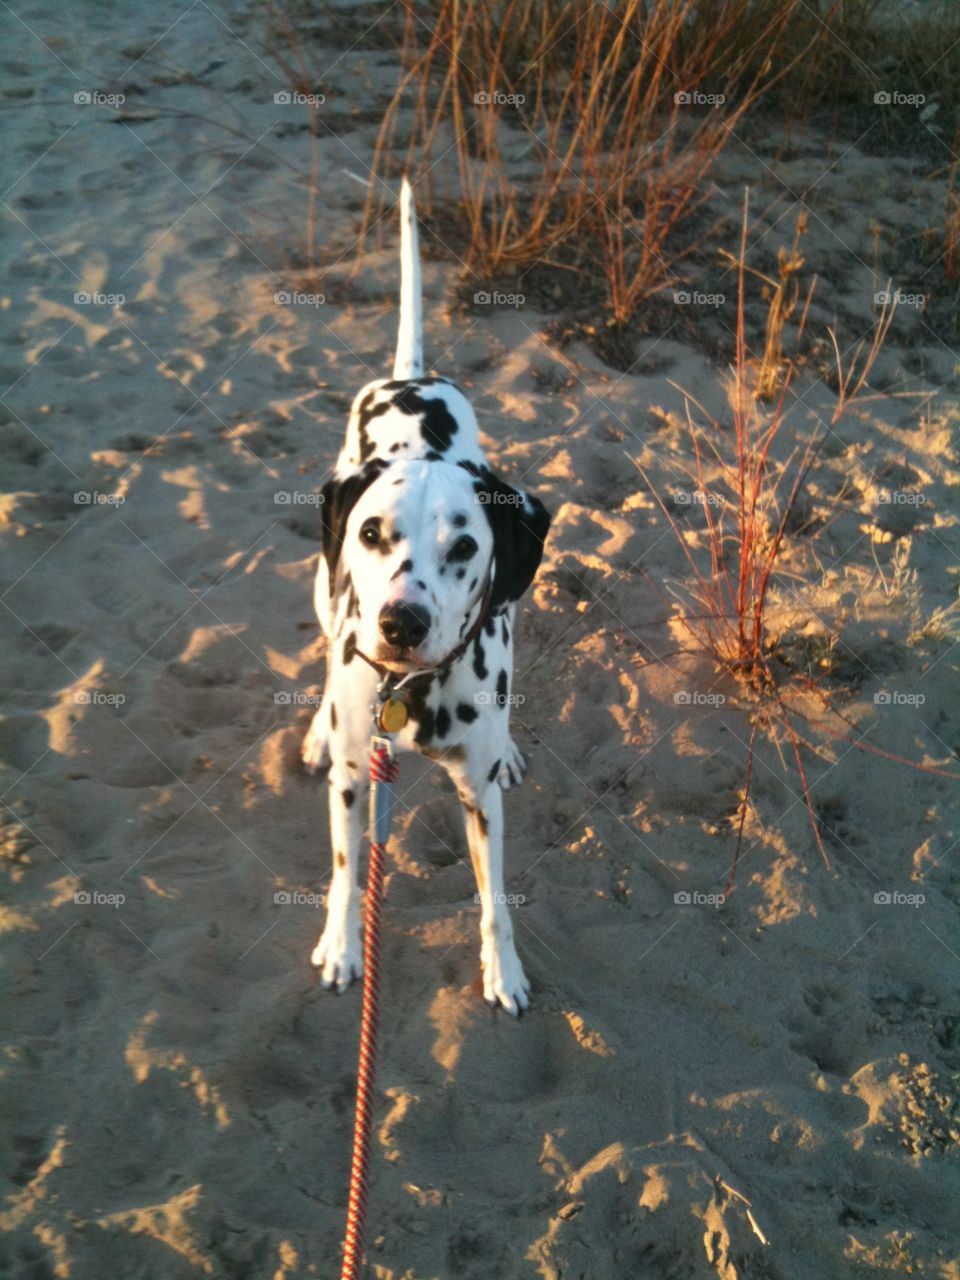 Dalmatian pup on the sand at sunset